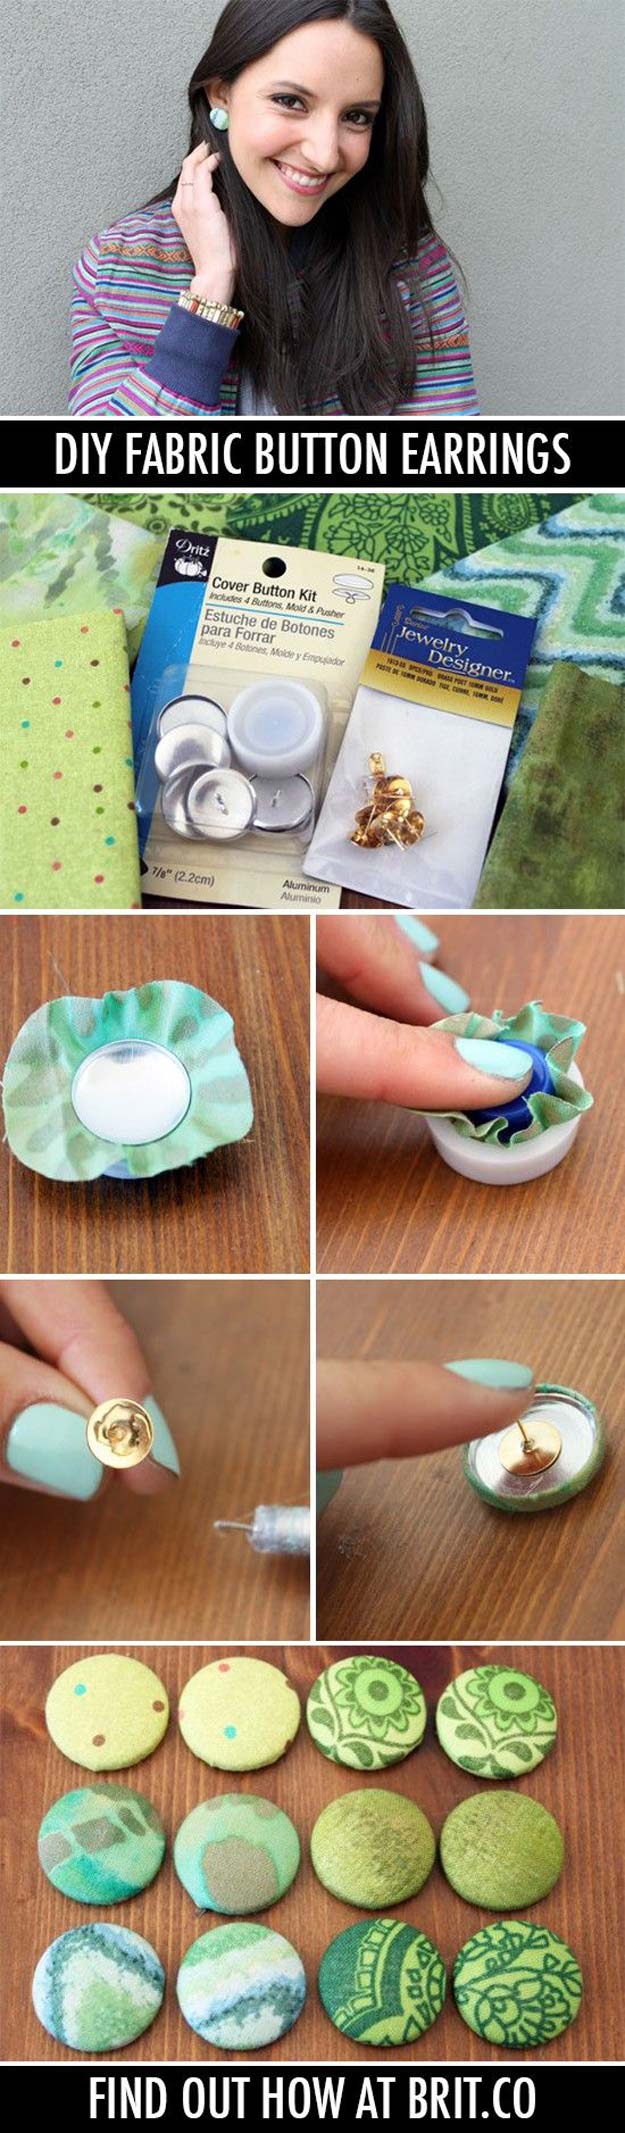 Create Your Own Fabric Button Earrings